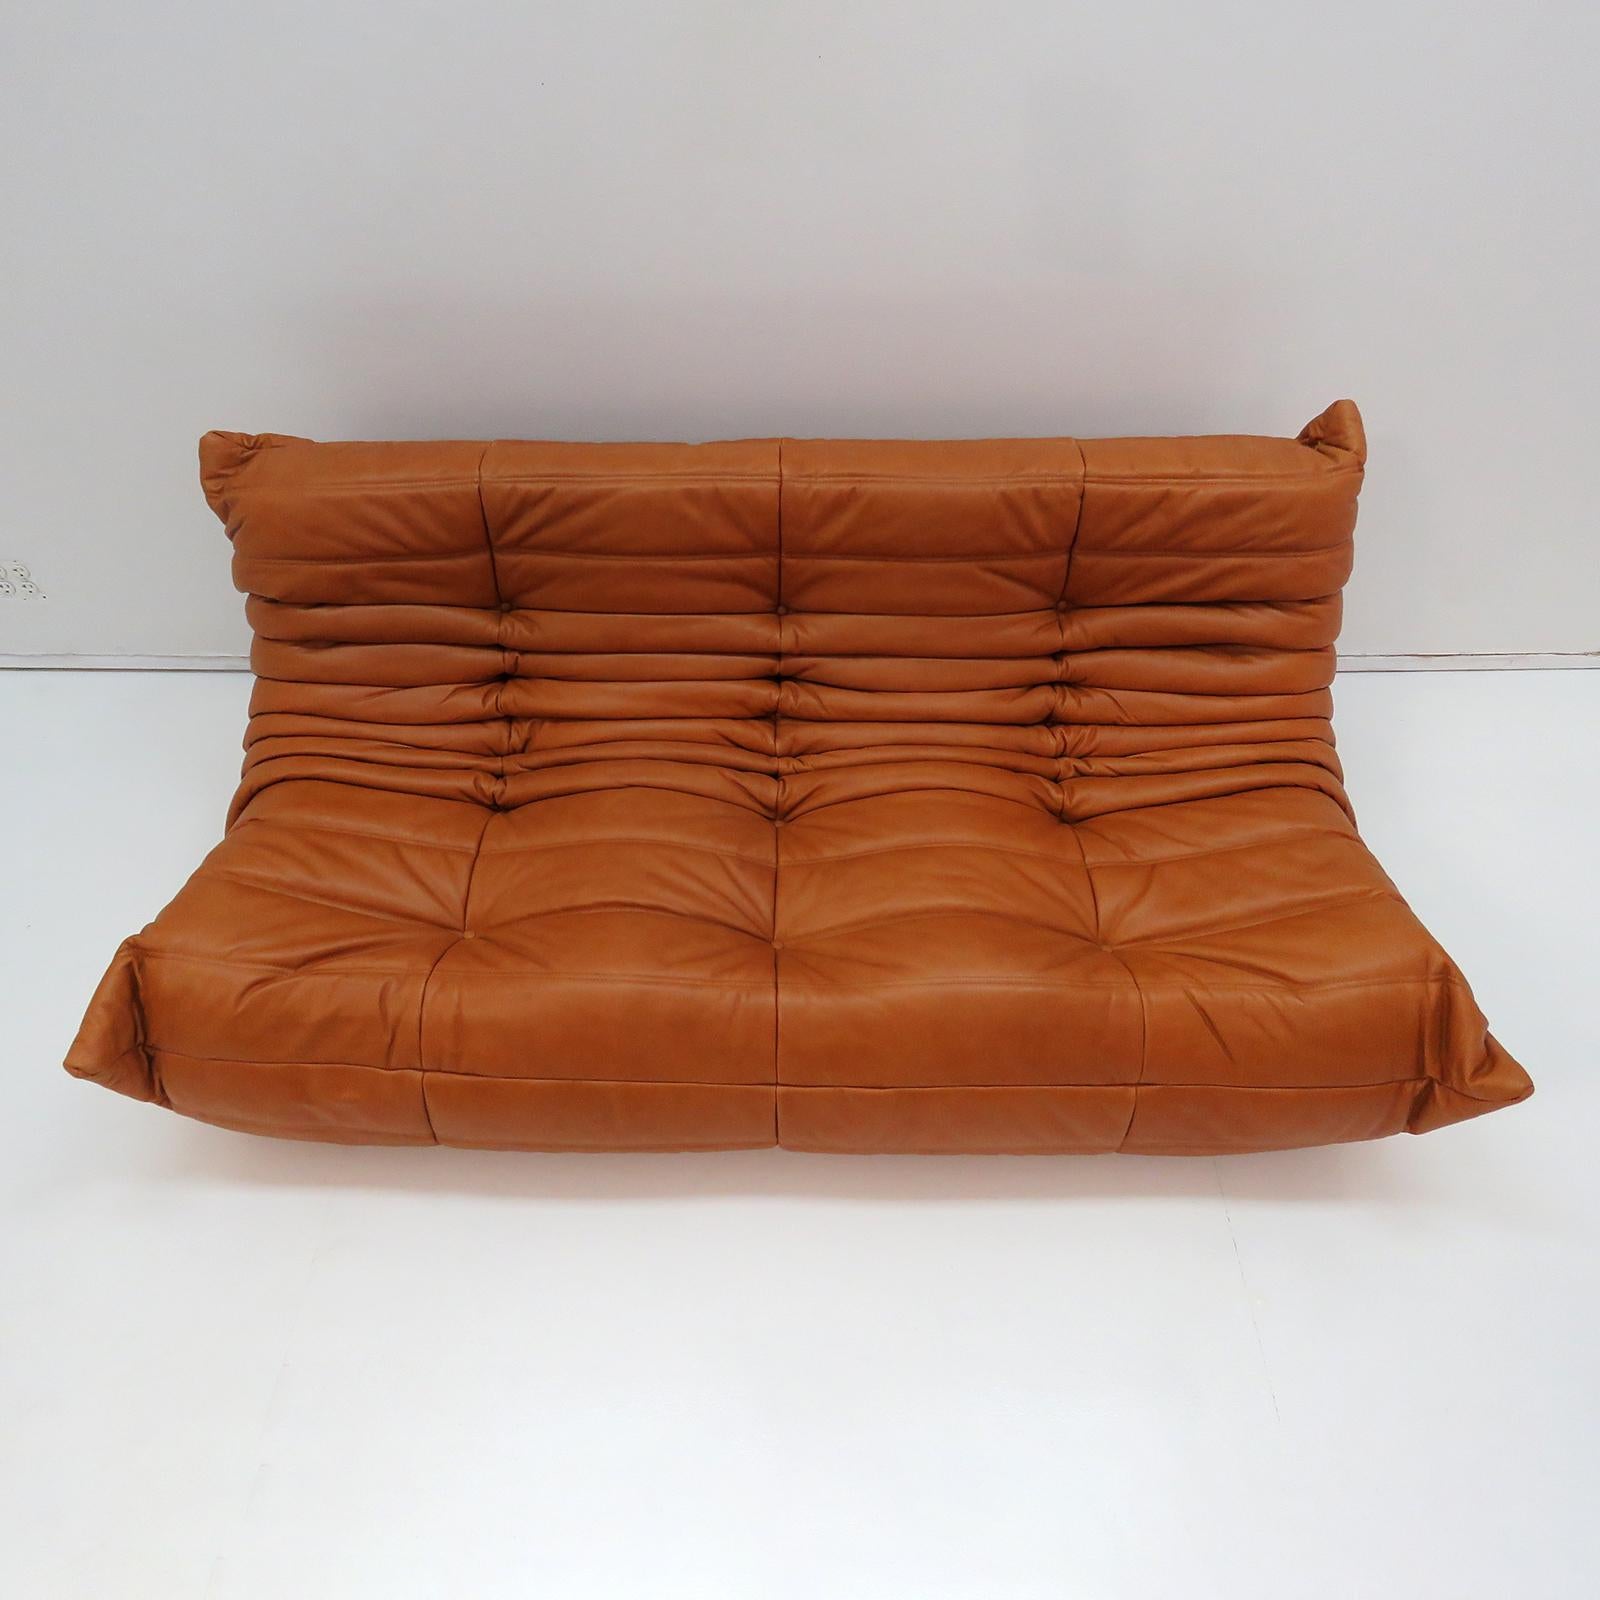 Leather Three-Seater Sofa 'Togo' by Michel Ducaroy for Ligne Roset